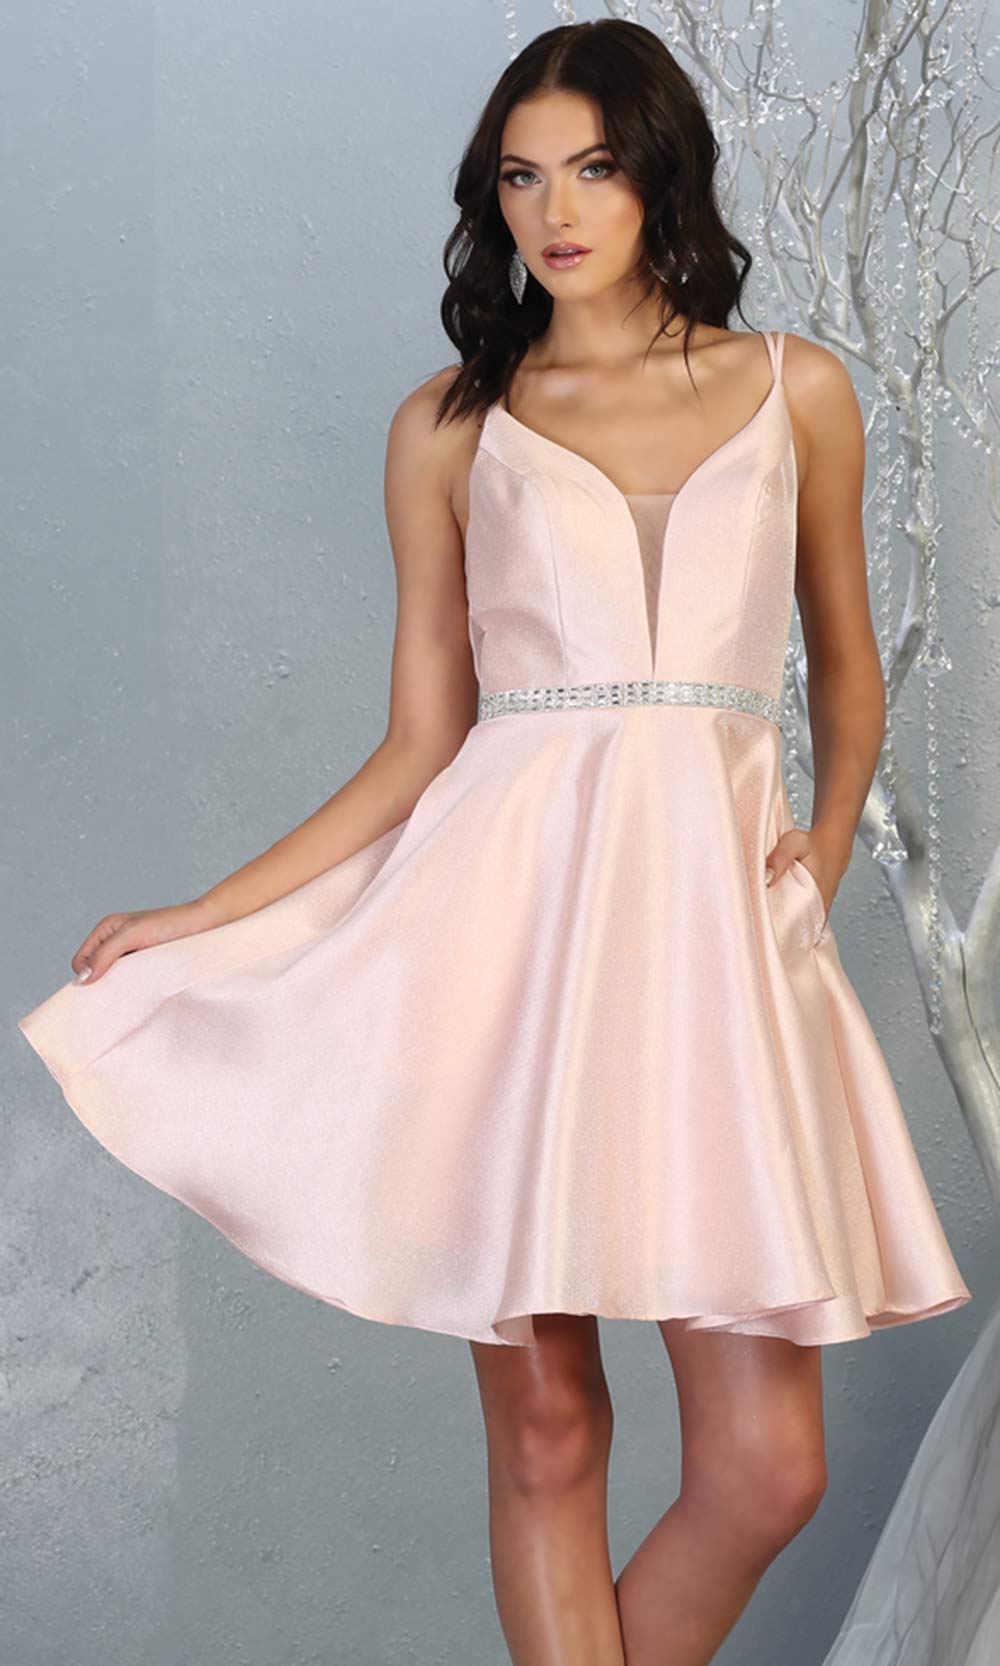 Mayqueen MQ1775 short blush pink satin flowy vneck simple grade 8 graduation dress w/ straps & low back. Light pink party dress is perfect for prom,graduation, grade 8 grad, confirmation dress, bat mitzvah dress, damas. Plus sizes avail for grad dress.jpg